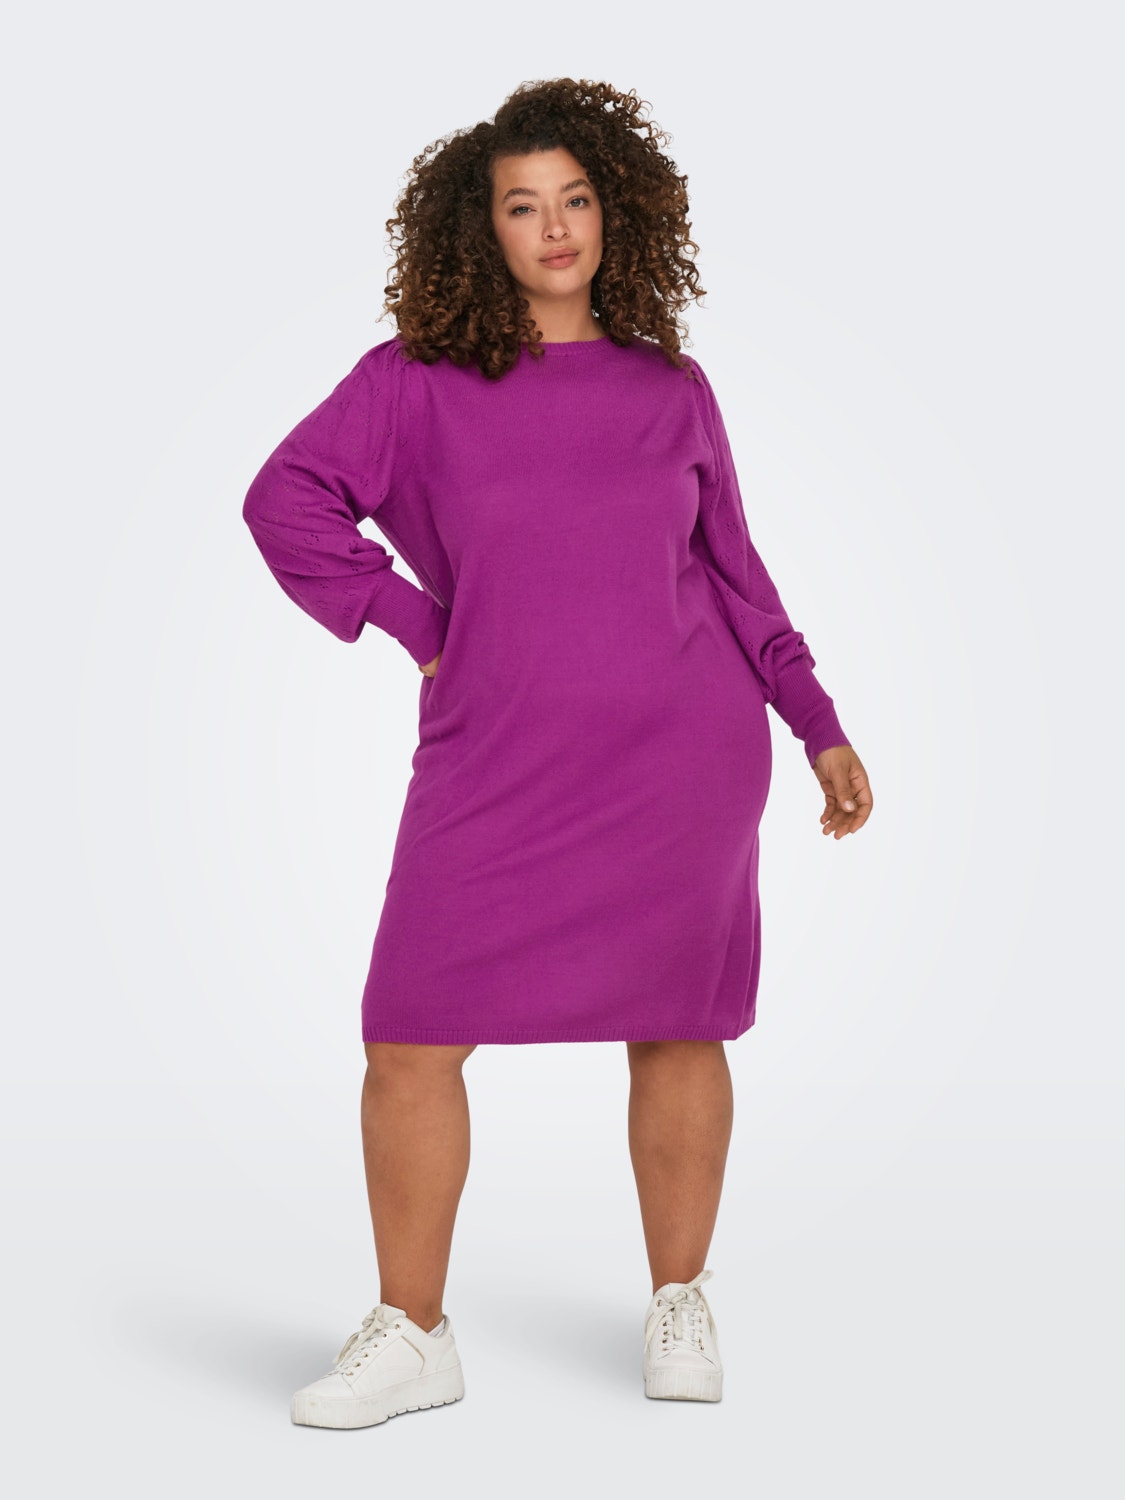 ONLY Loose Fit O-Neck Long dress -Purple Wine - 15303651